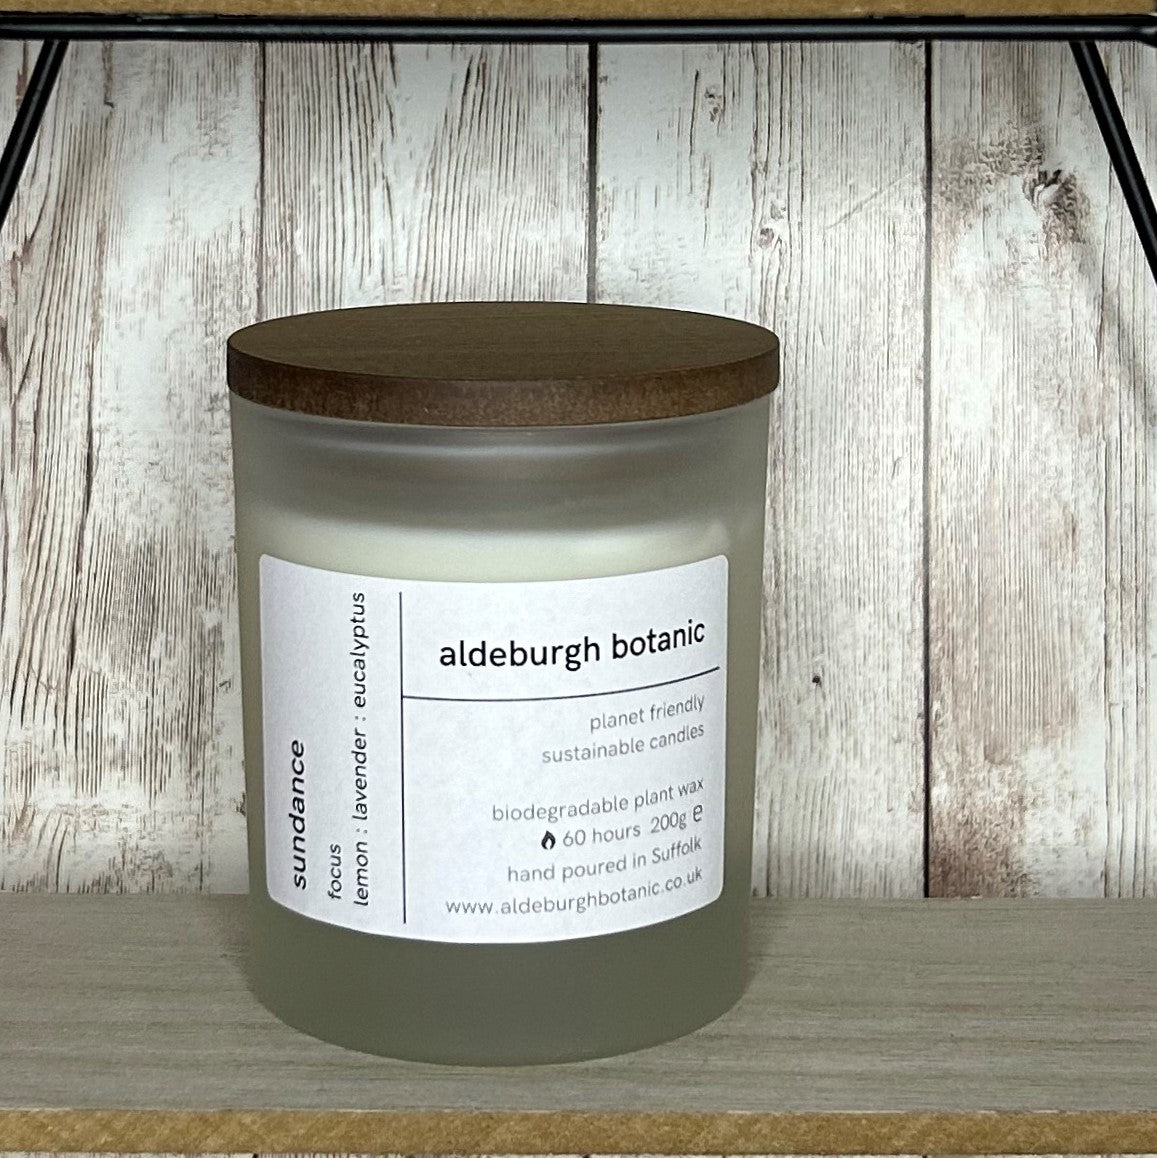 200g Container Candle - Sundance